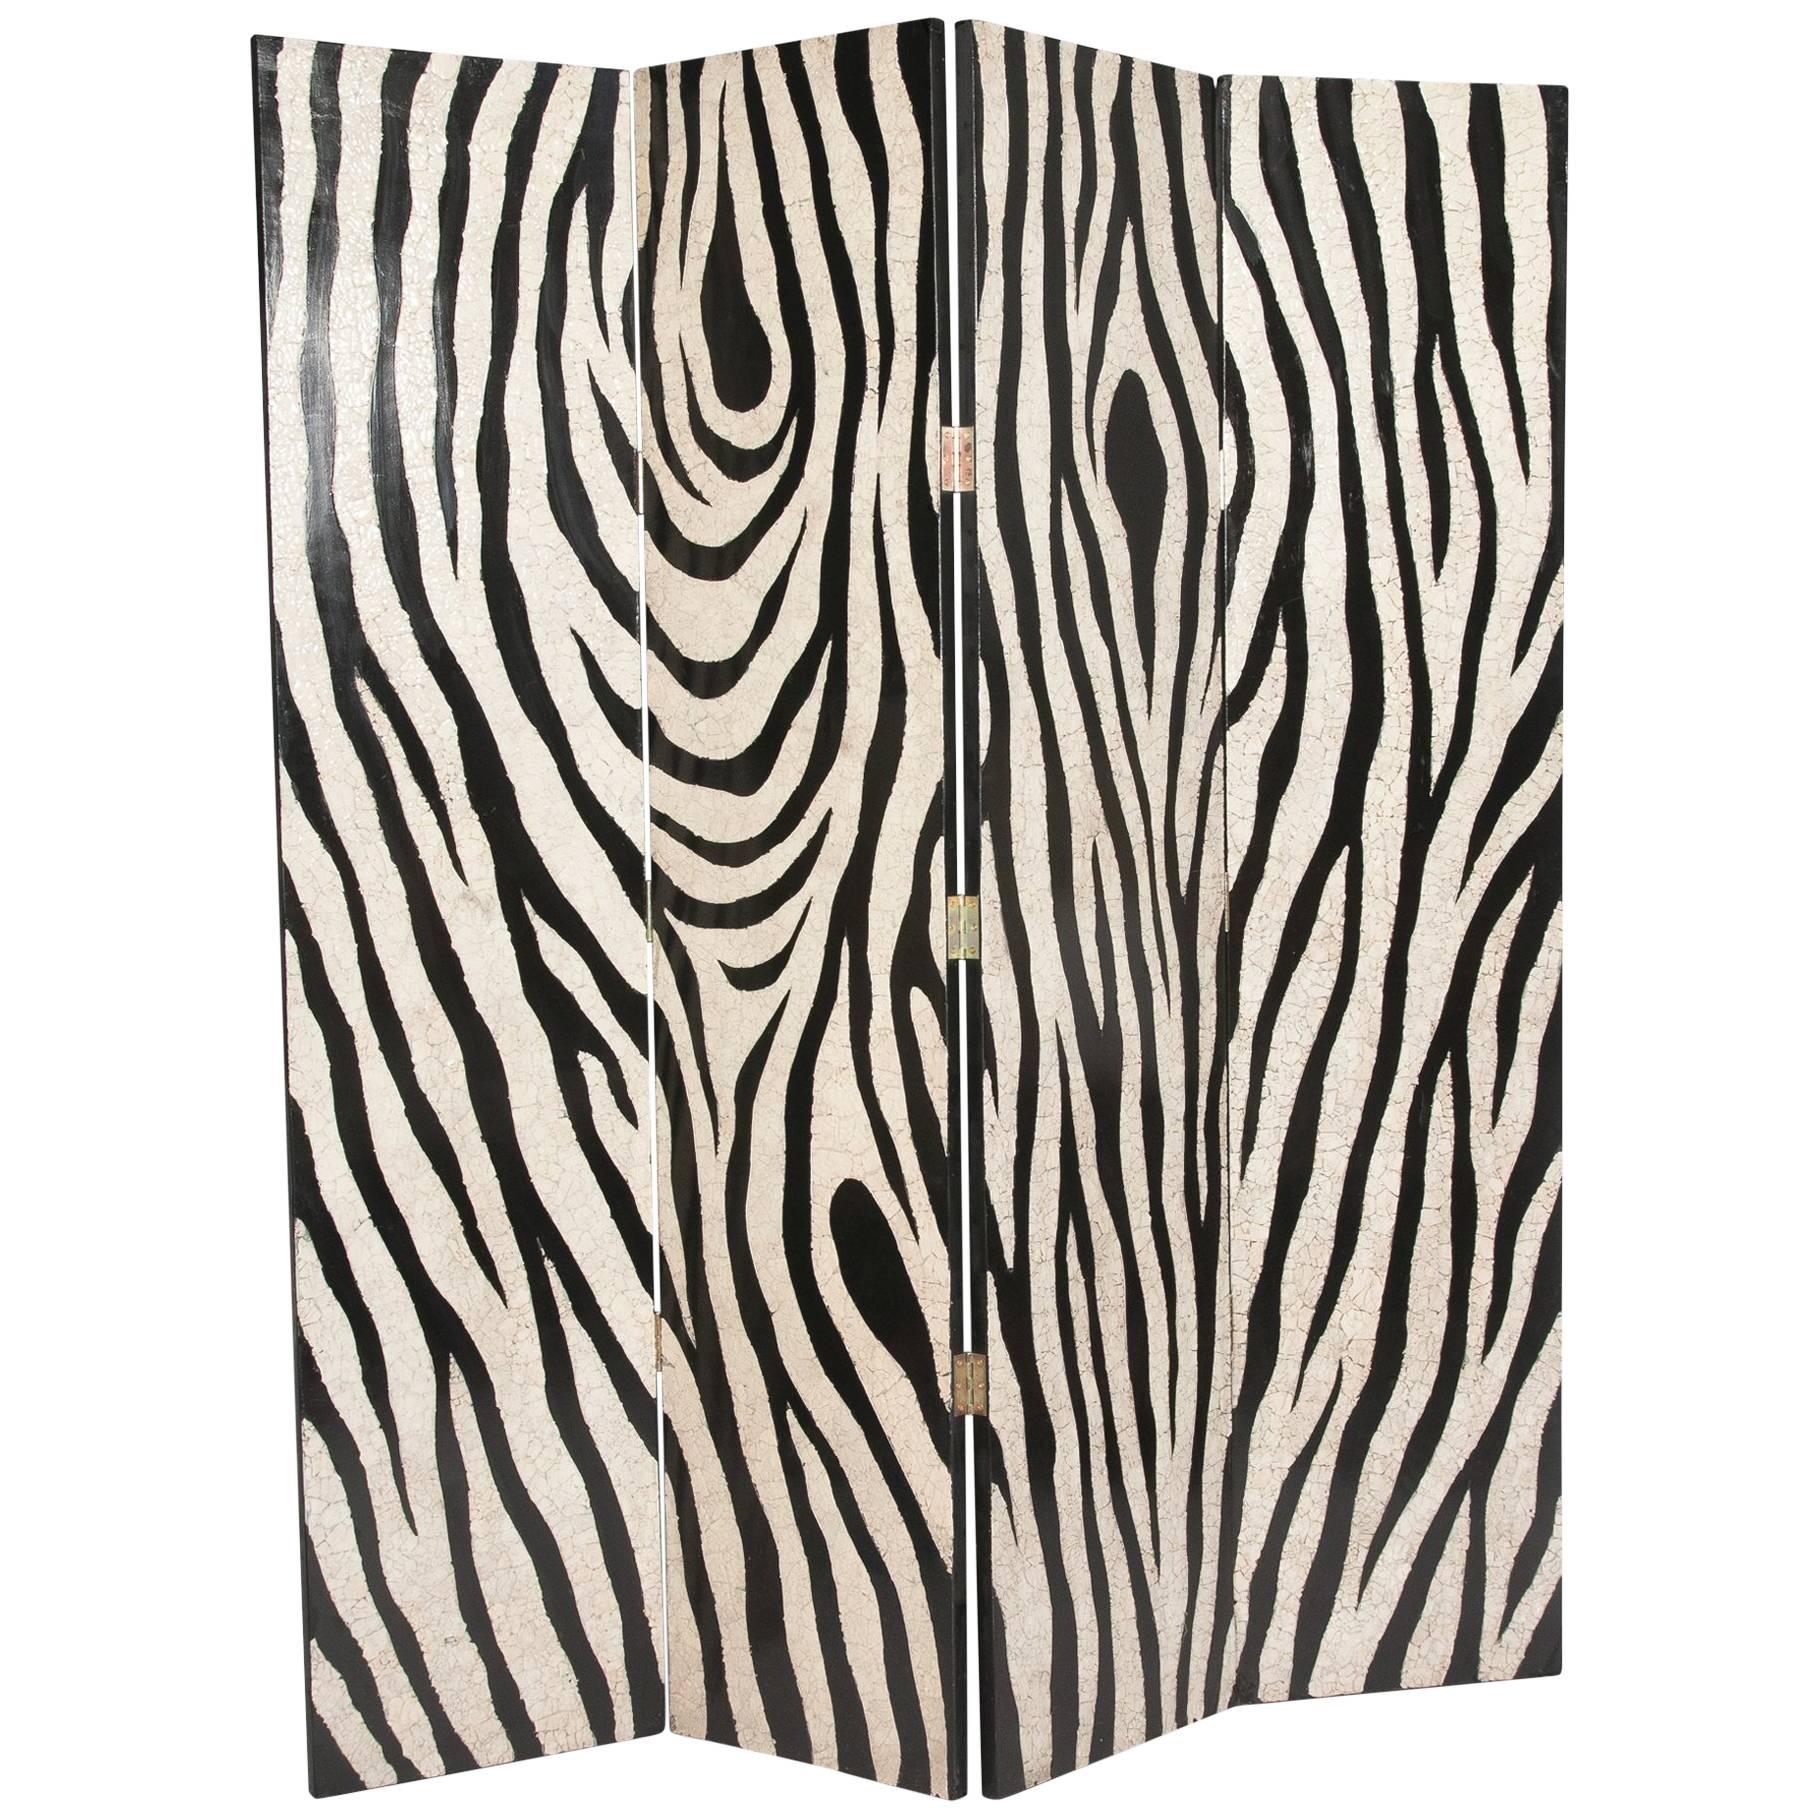 Eggshell and Lacquer Zebra Pattern Four-Panel Folding Screen For Sale